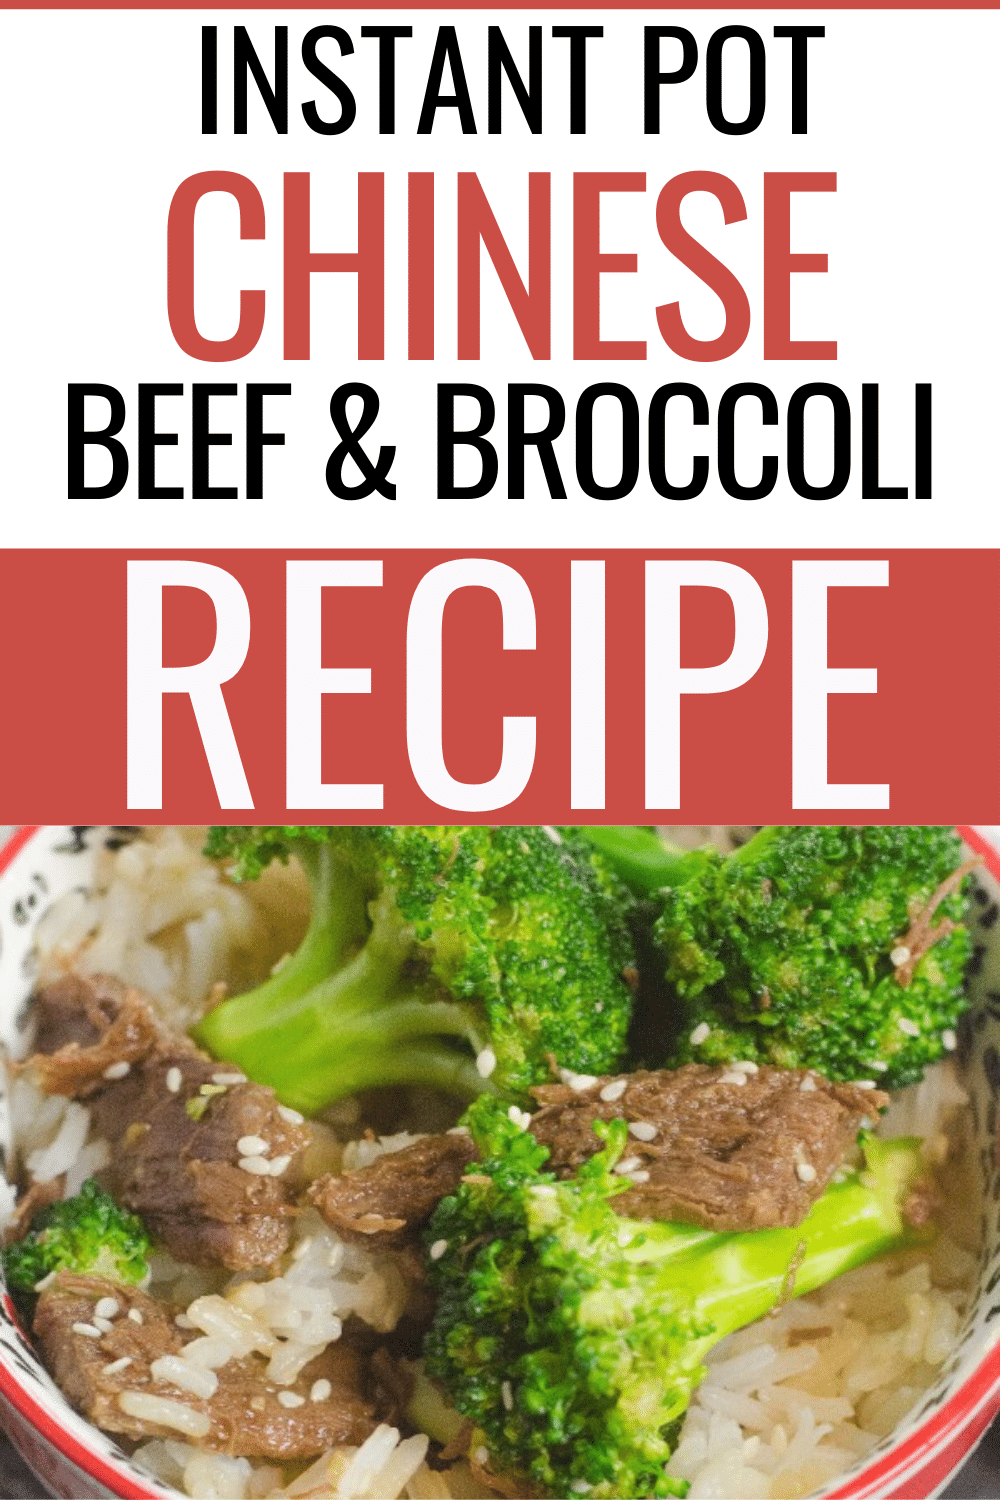 This Instant Pot Chinese Beef and Broccoli is such an easy meal to make and it's so yummy! It's the perfect meal for busy weeknights. #instantpotrecipes #chineserecipes #beef #pressurecooker #wondermomwannabe via @wondermomwannab